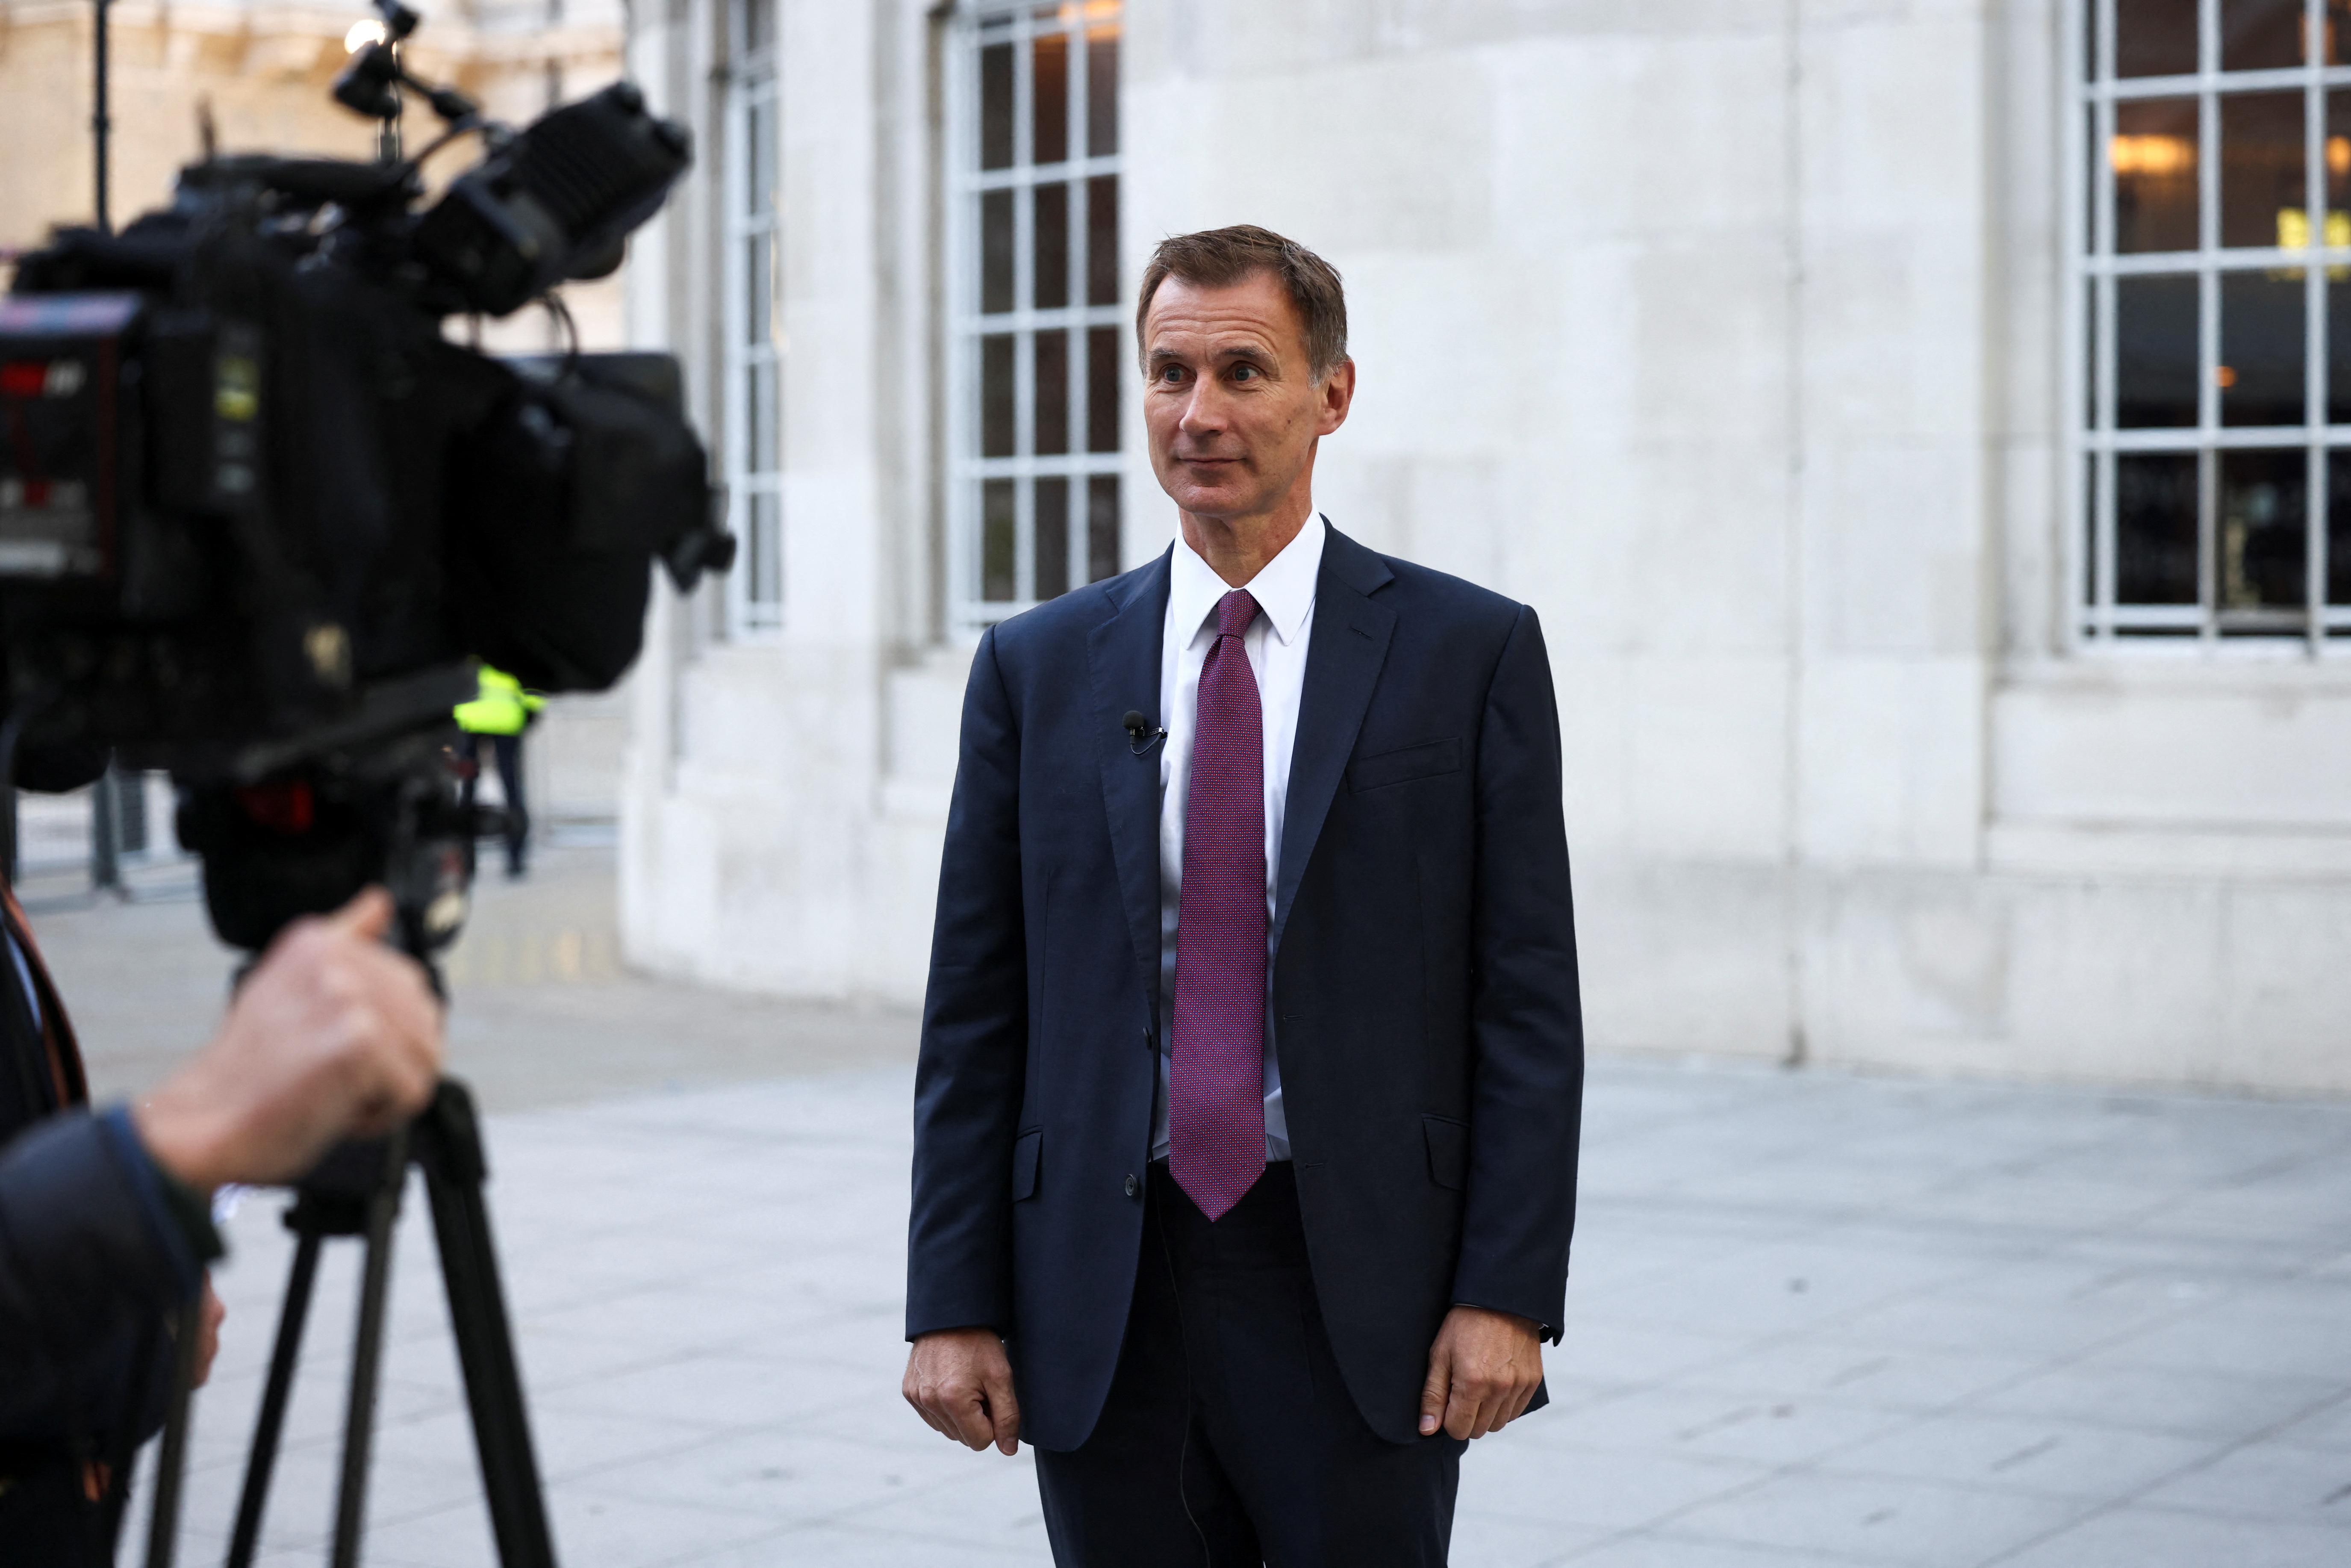 British Chancellor of the Exchequer Jeremy Hunt interview, in London